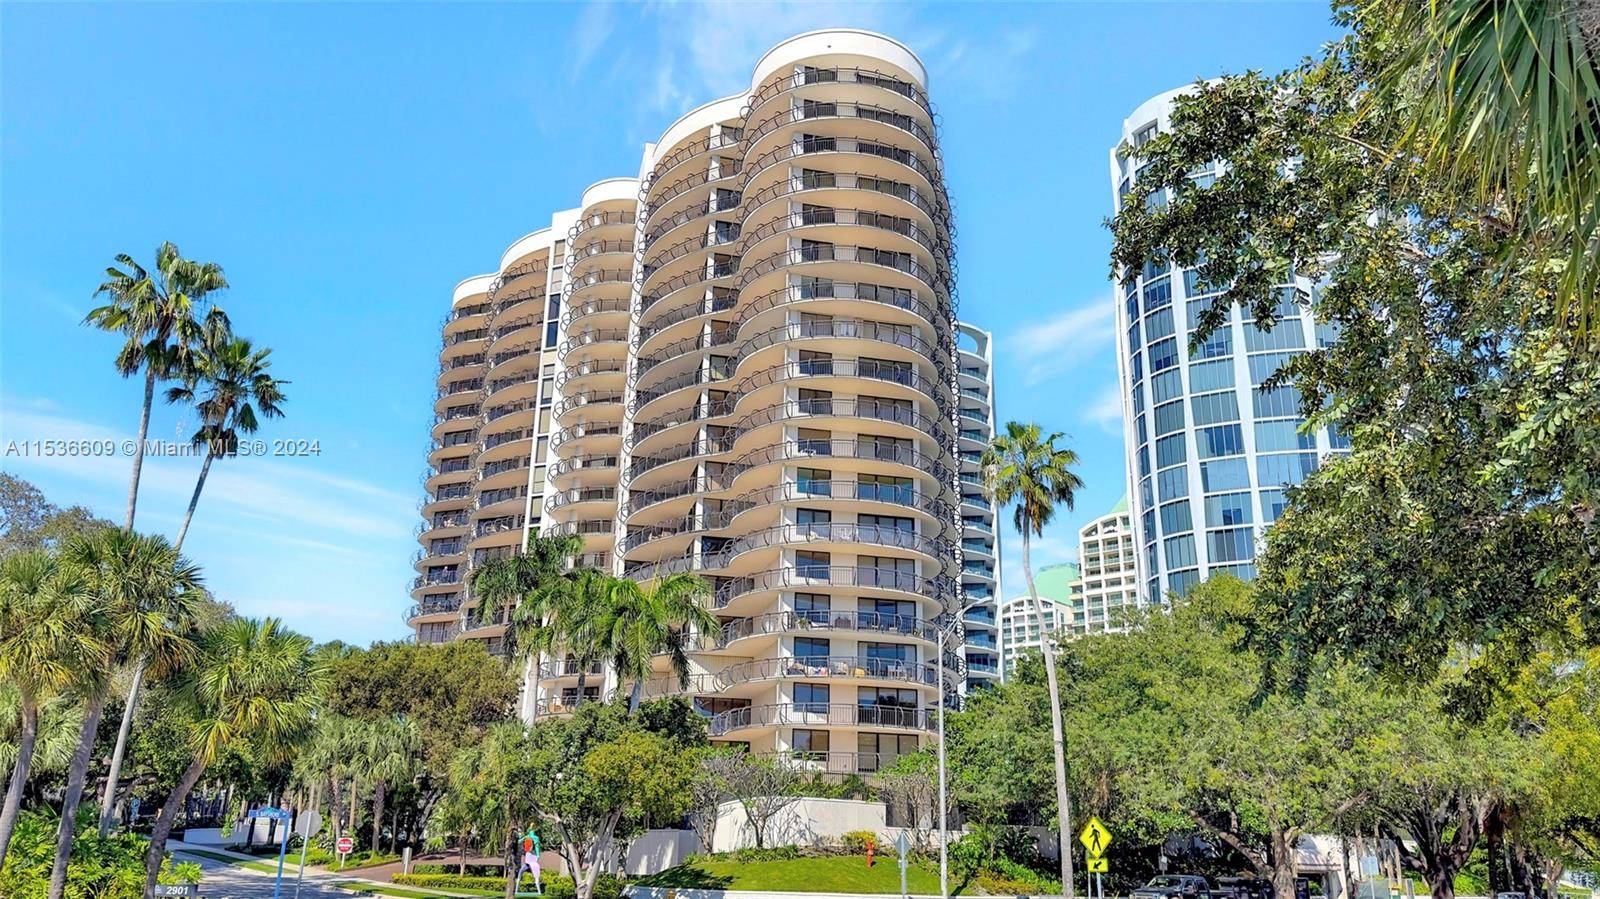 Spectacular Grove Towers spacious 2 bedroom, 2 bath home with plenty of natural light from the floor to ceiling sliding glass doors which open to the beautiful wraparound balconies.